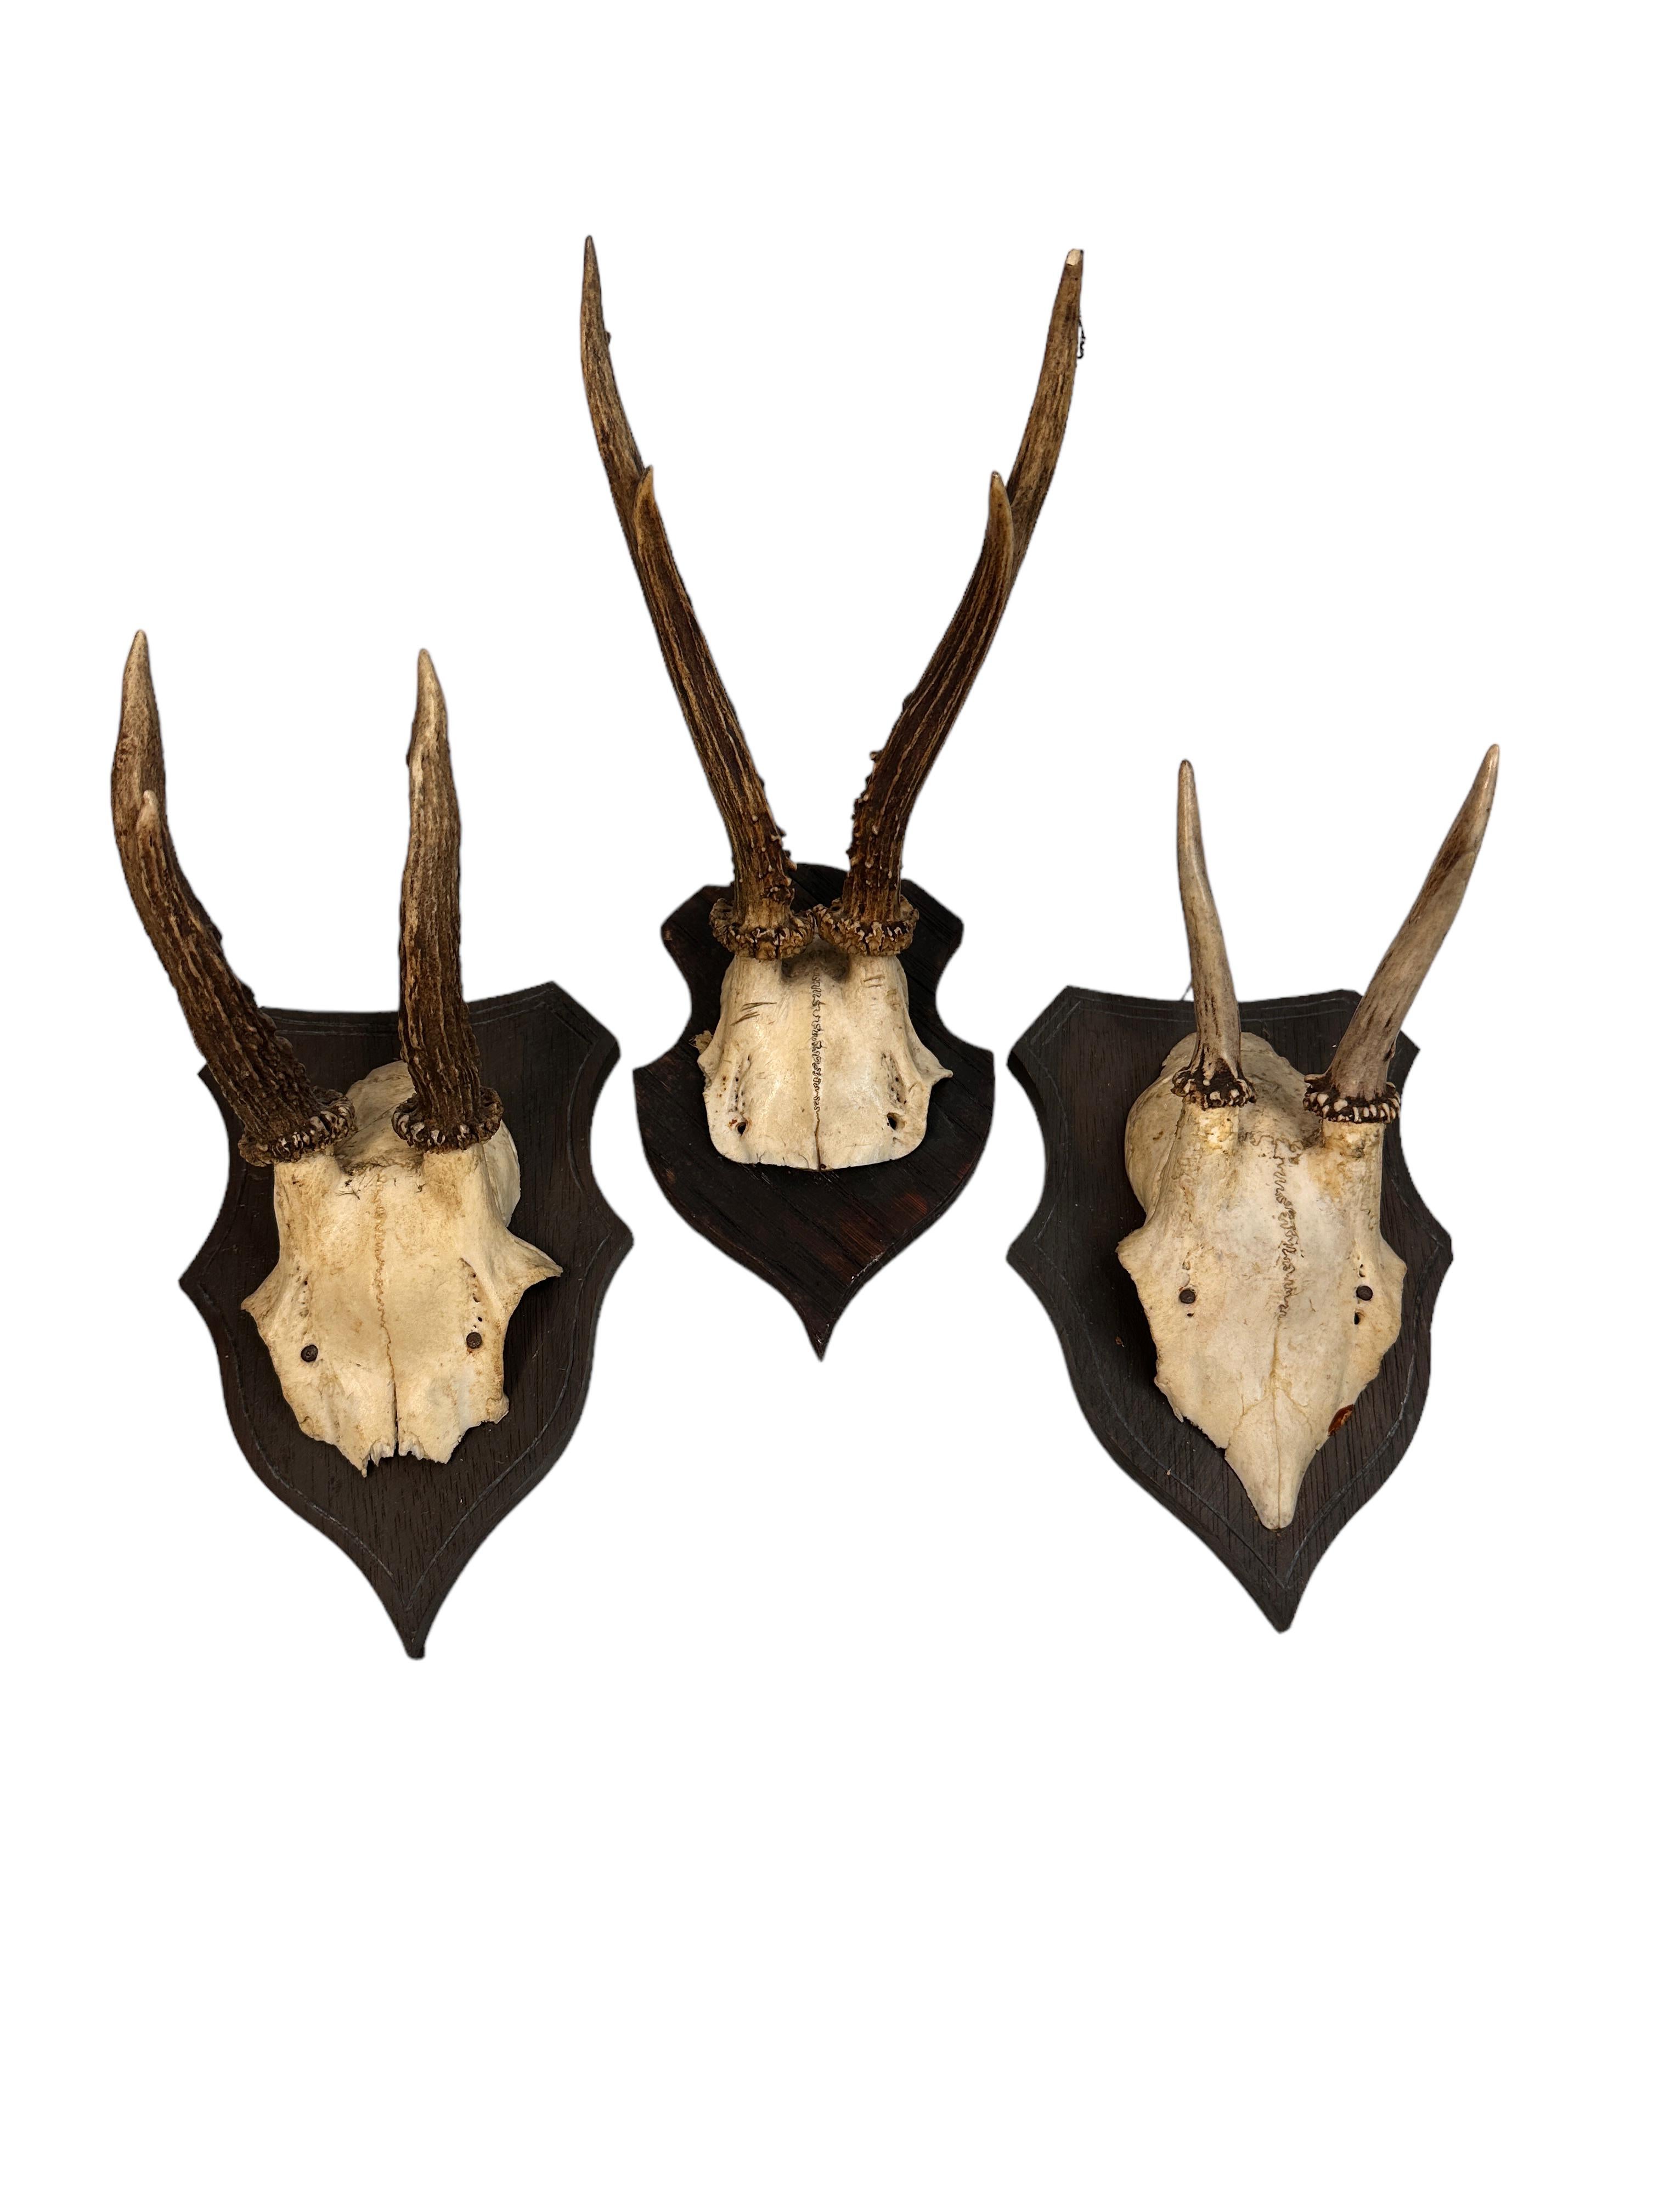 A beautiful set of three Black Forest roe deer antler trophy on hand carved, Black Forest wooden plaque. A nice addition to your hunters loge, Cabin or just to display it in your house. Found at an estate sale in Vienna, Austria.
The sizes given in